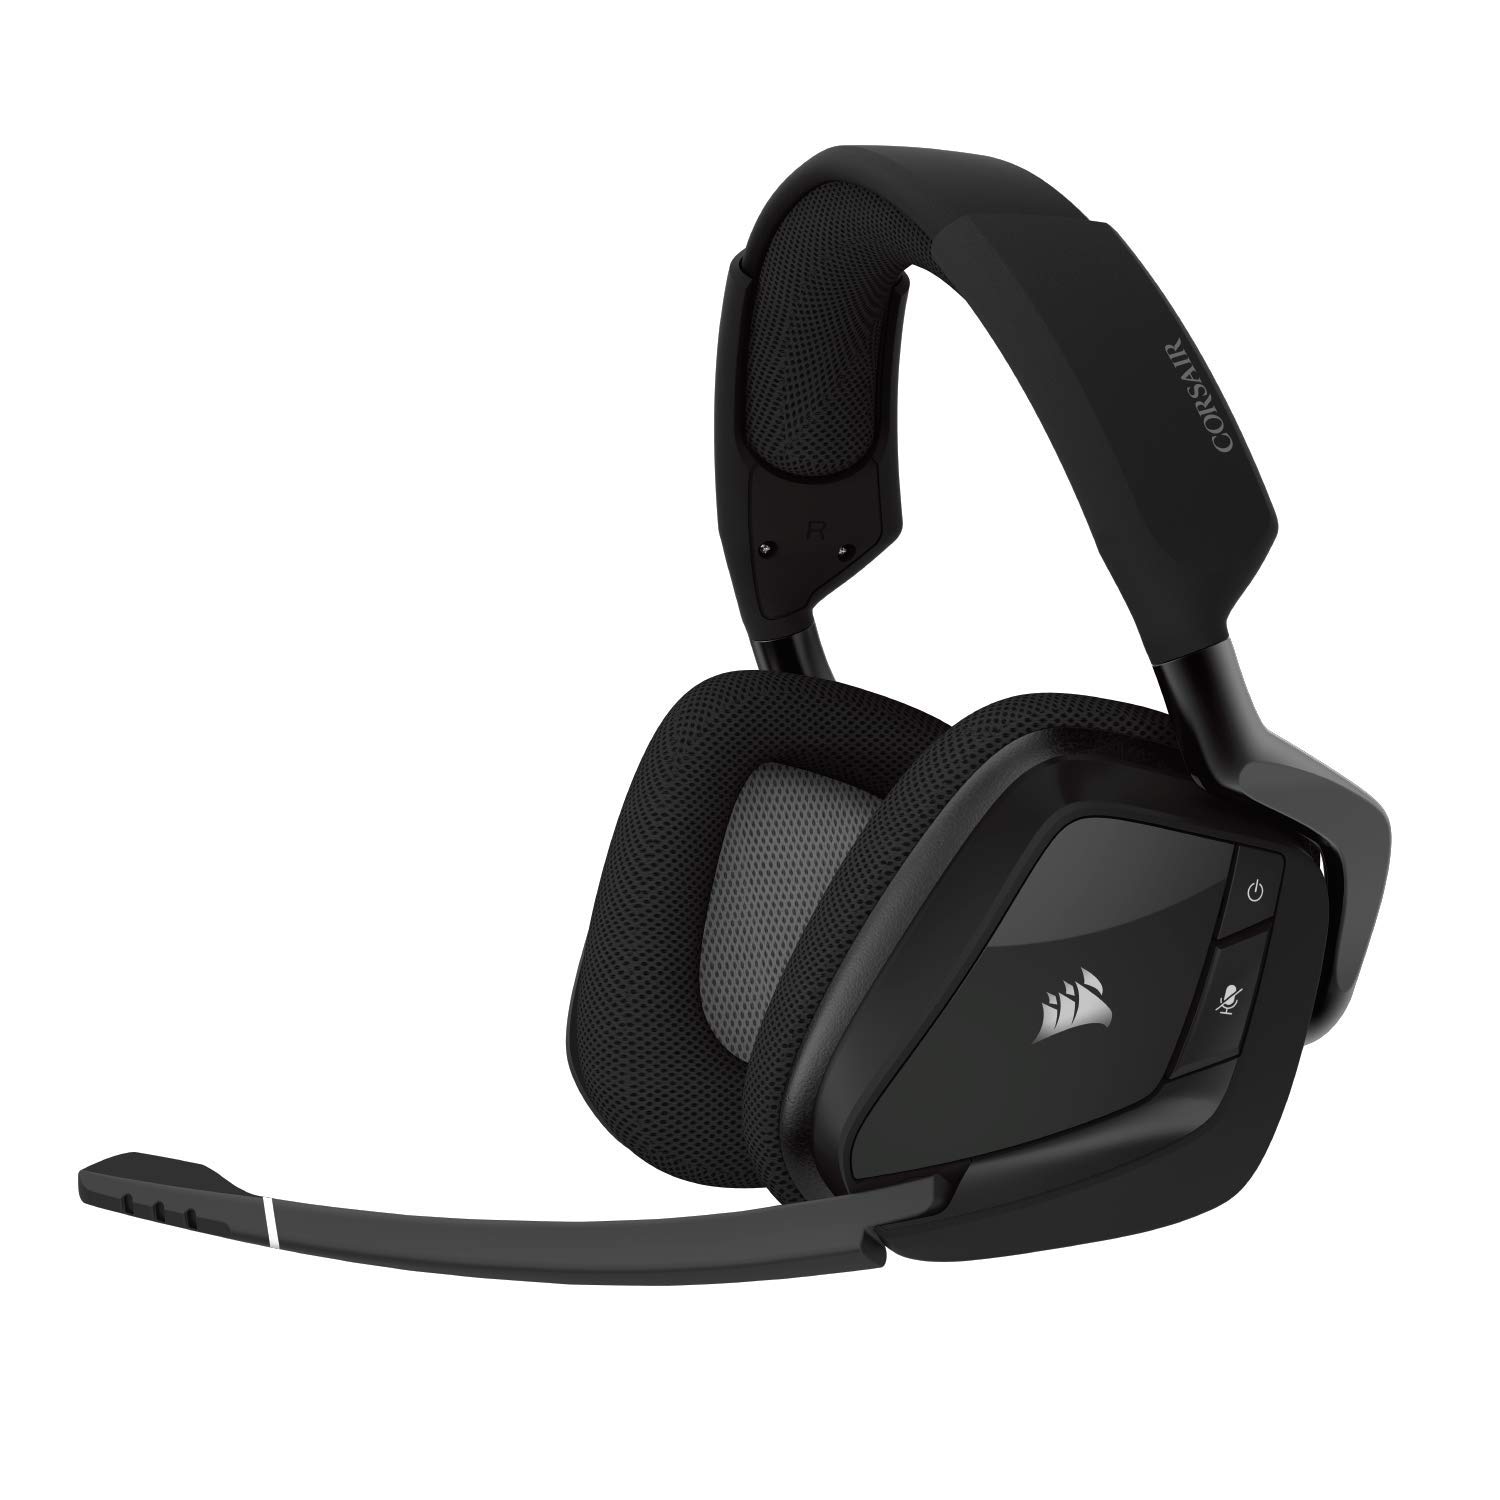 Corsair wireless headset with sound cutting out